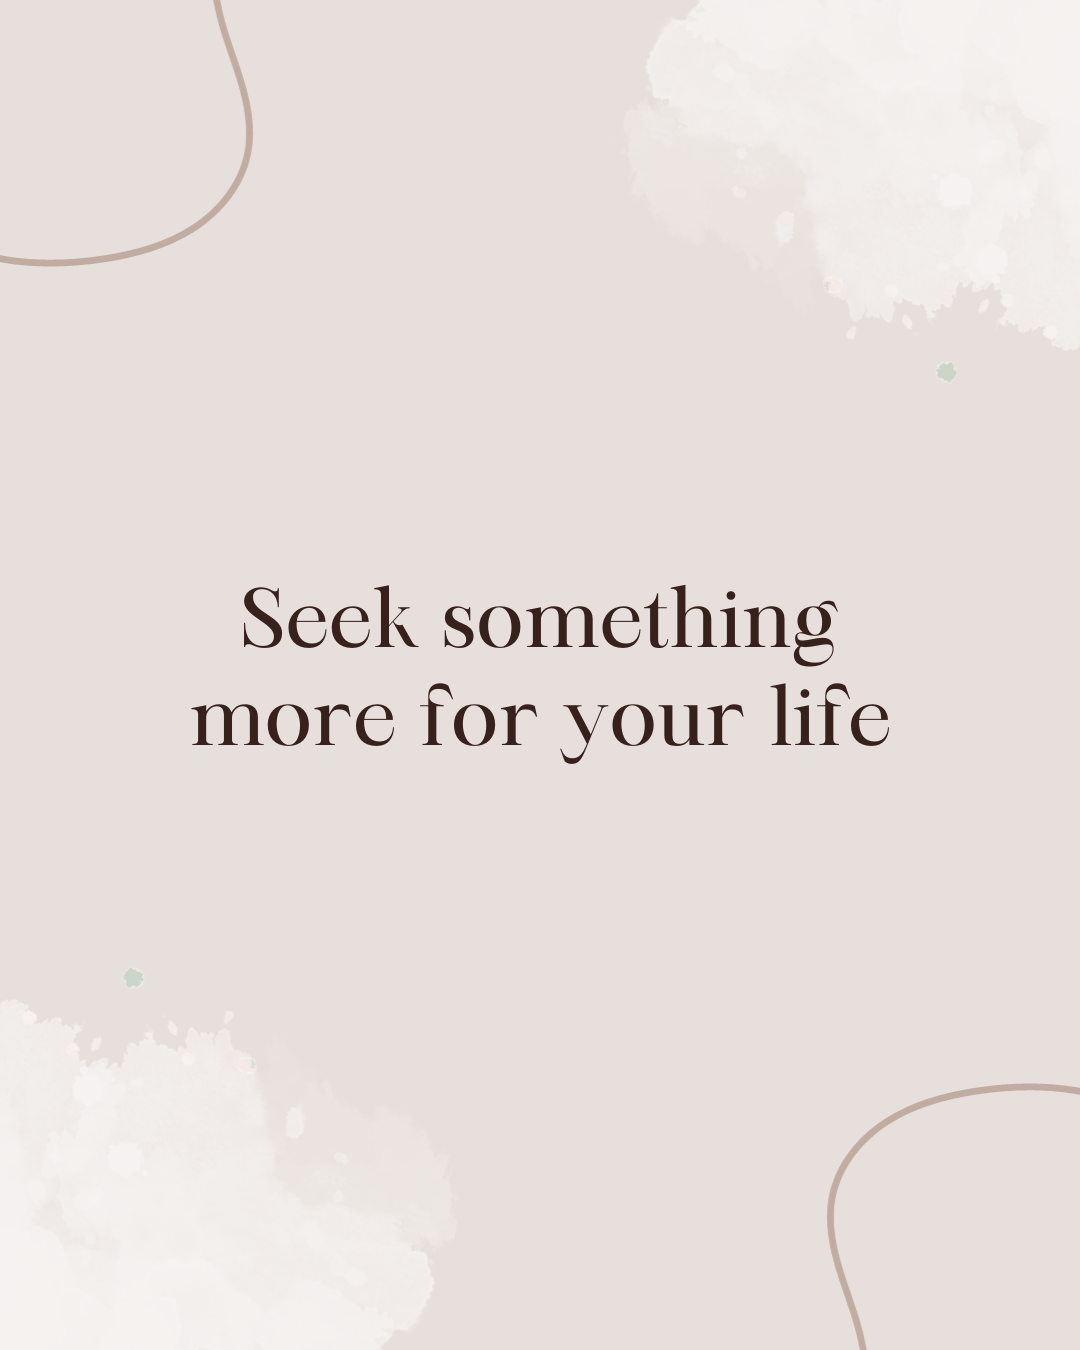 Seek something more for your life; you deserve to witness the light at the end of the tunnel.